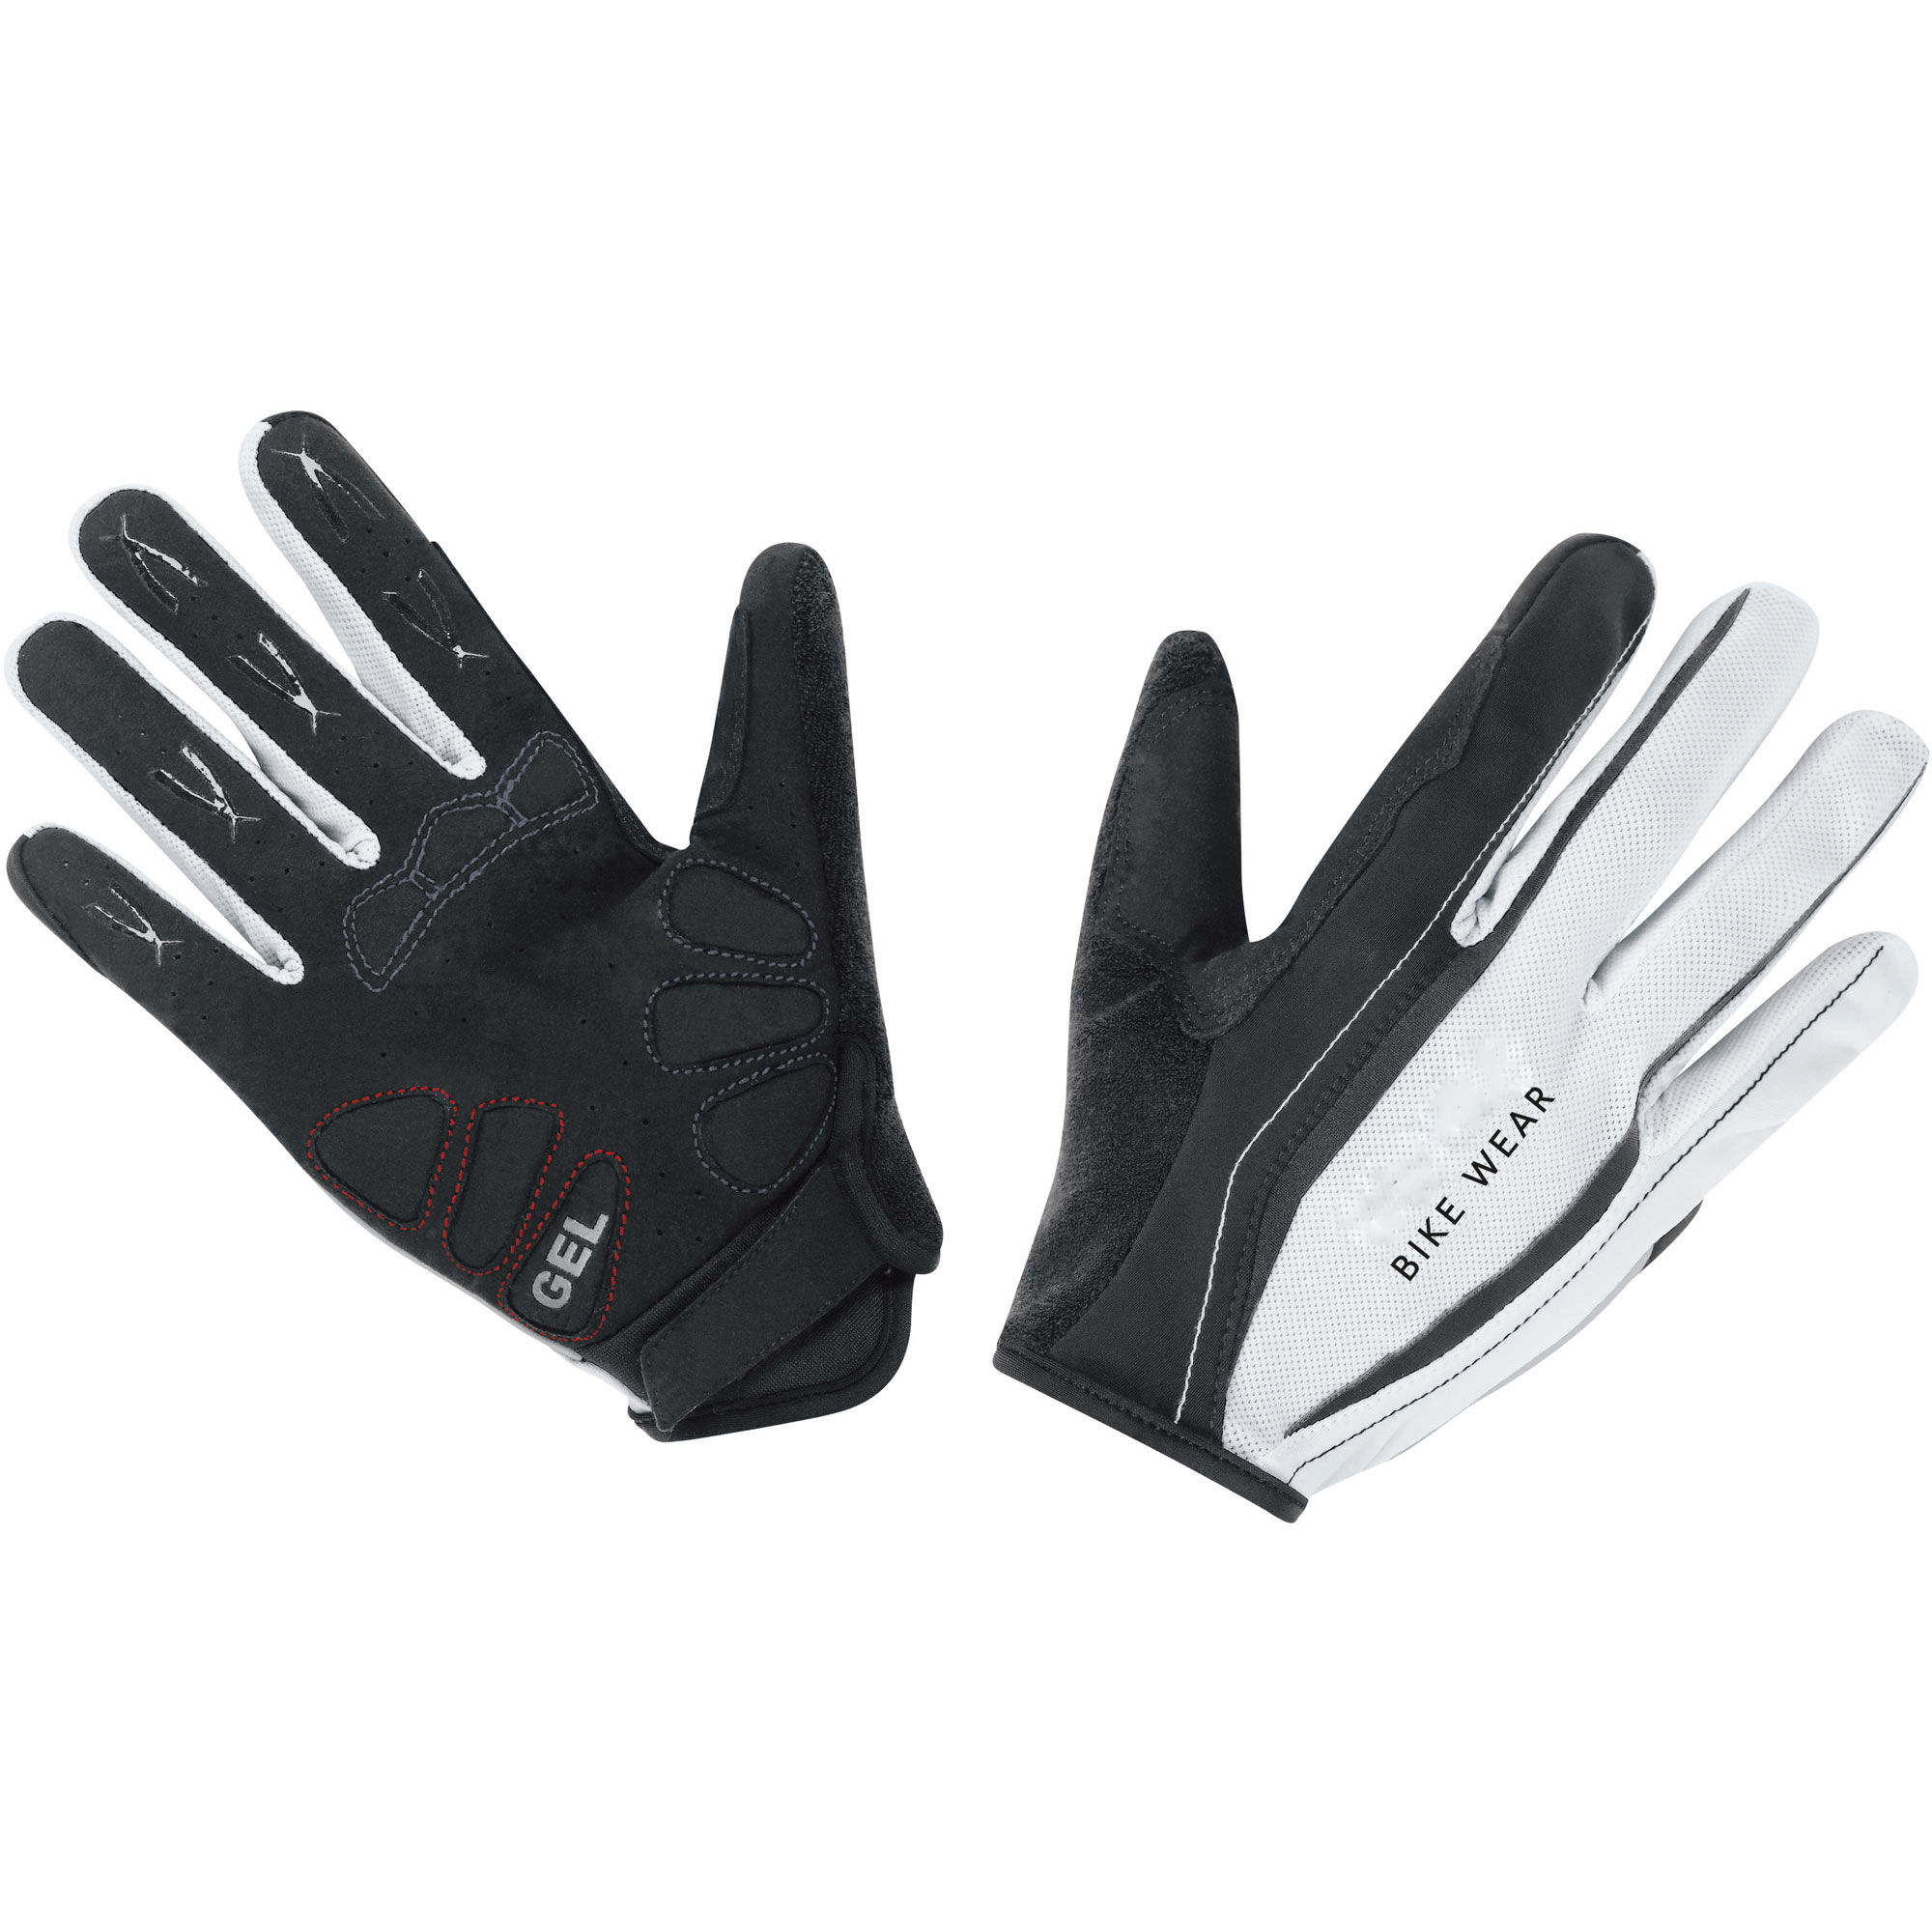 custom full finger  road bicycle gloves  pad reinforced durable flexible bicycle gloves